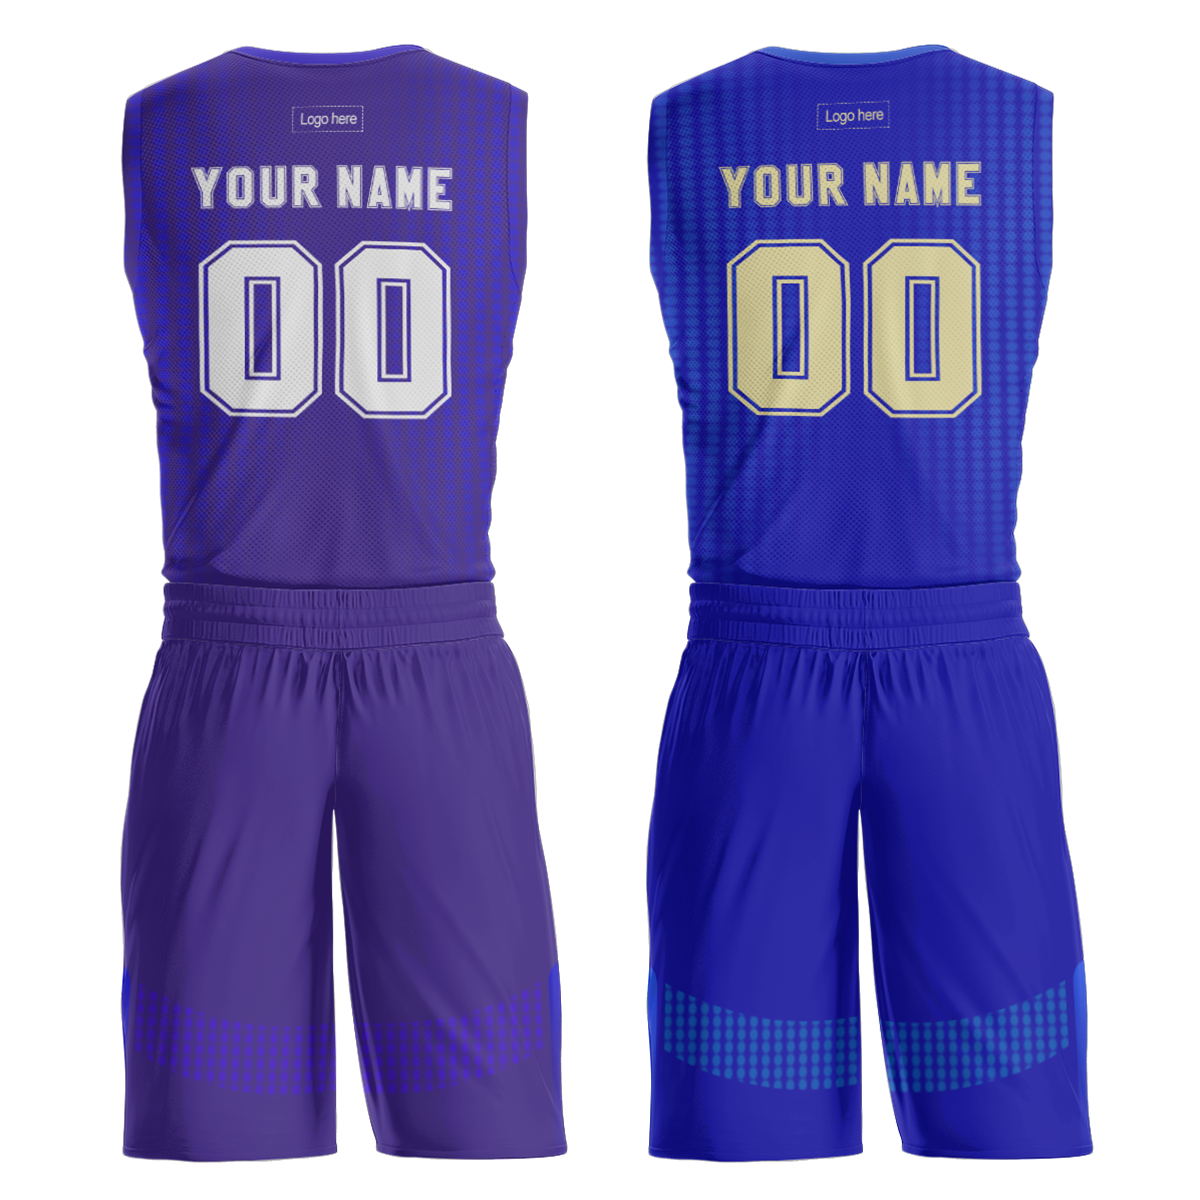 Newest Customize Printed Basketball Jersey Design Color Sublimated Basketball Uniforms Set